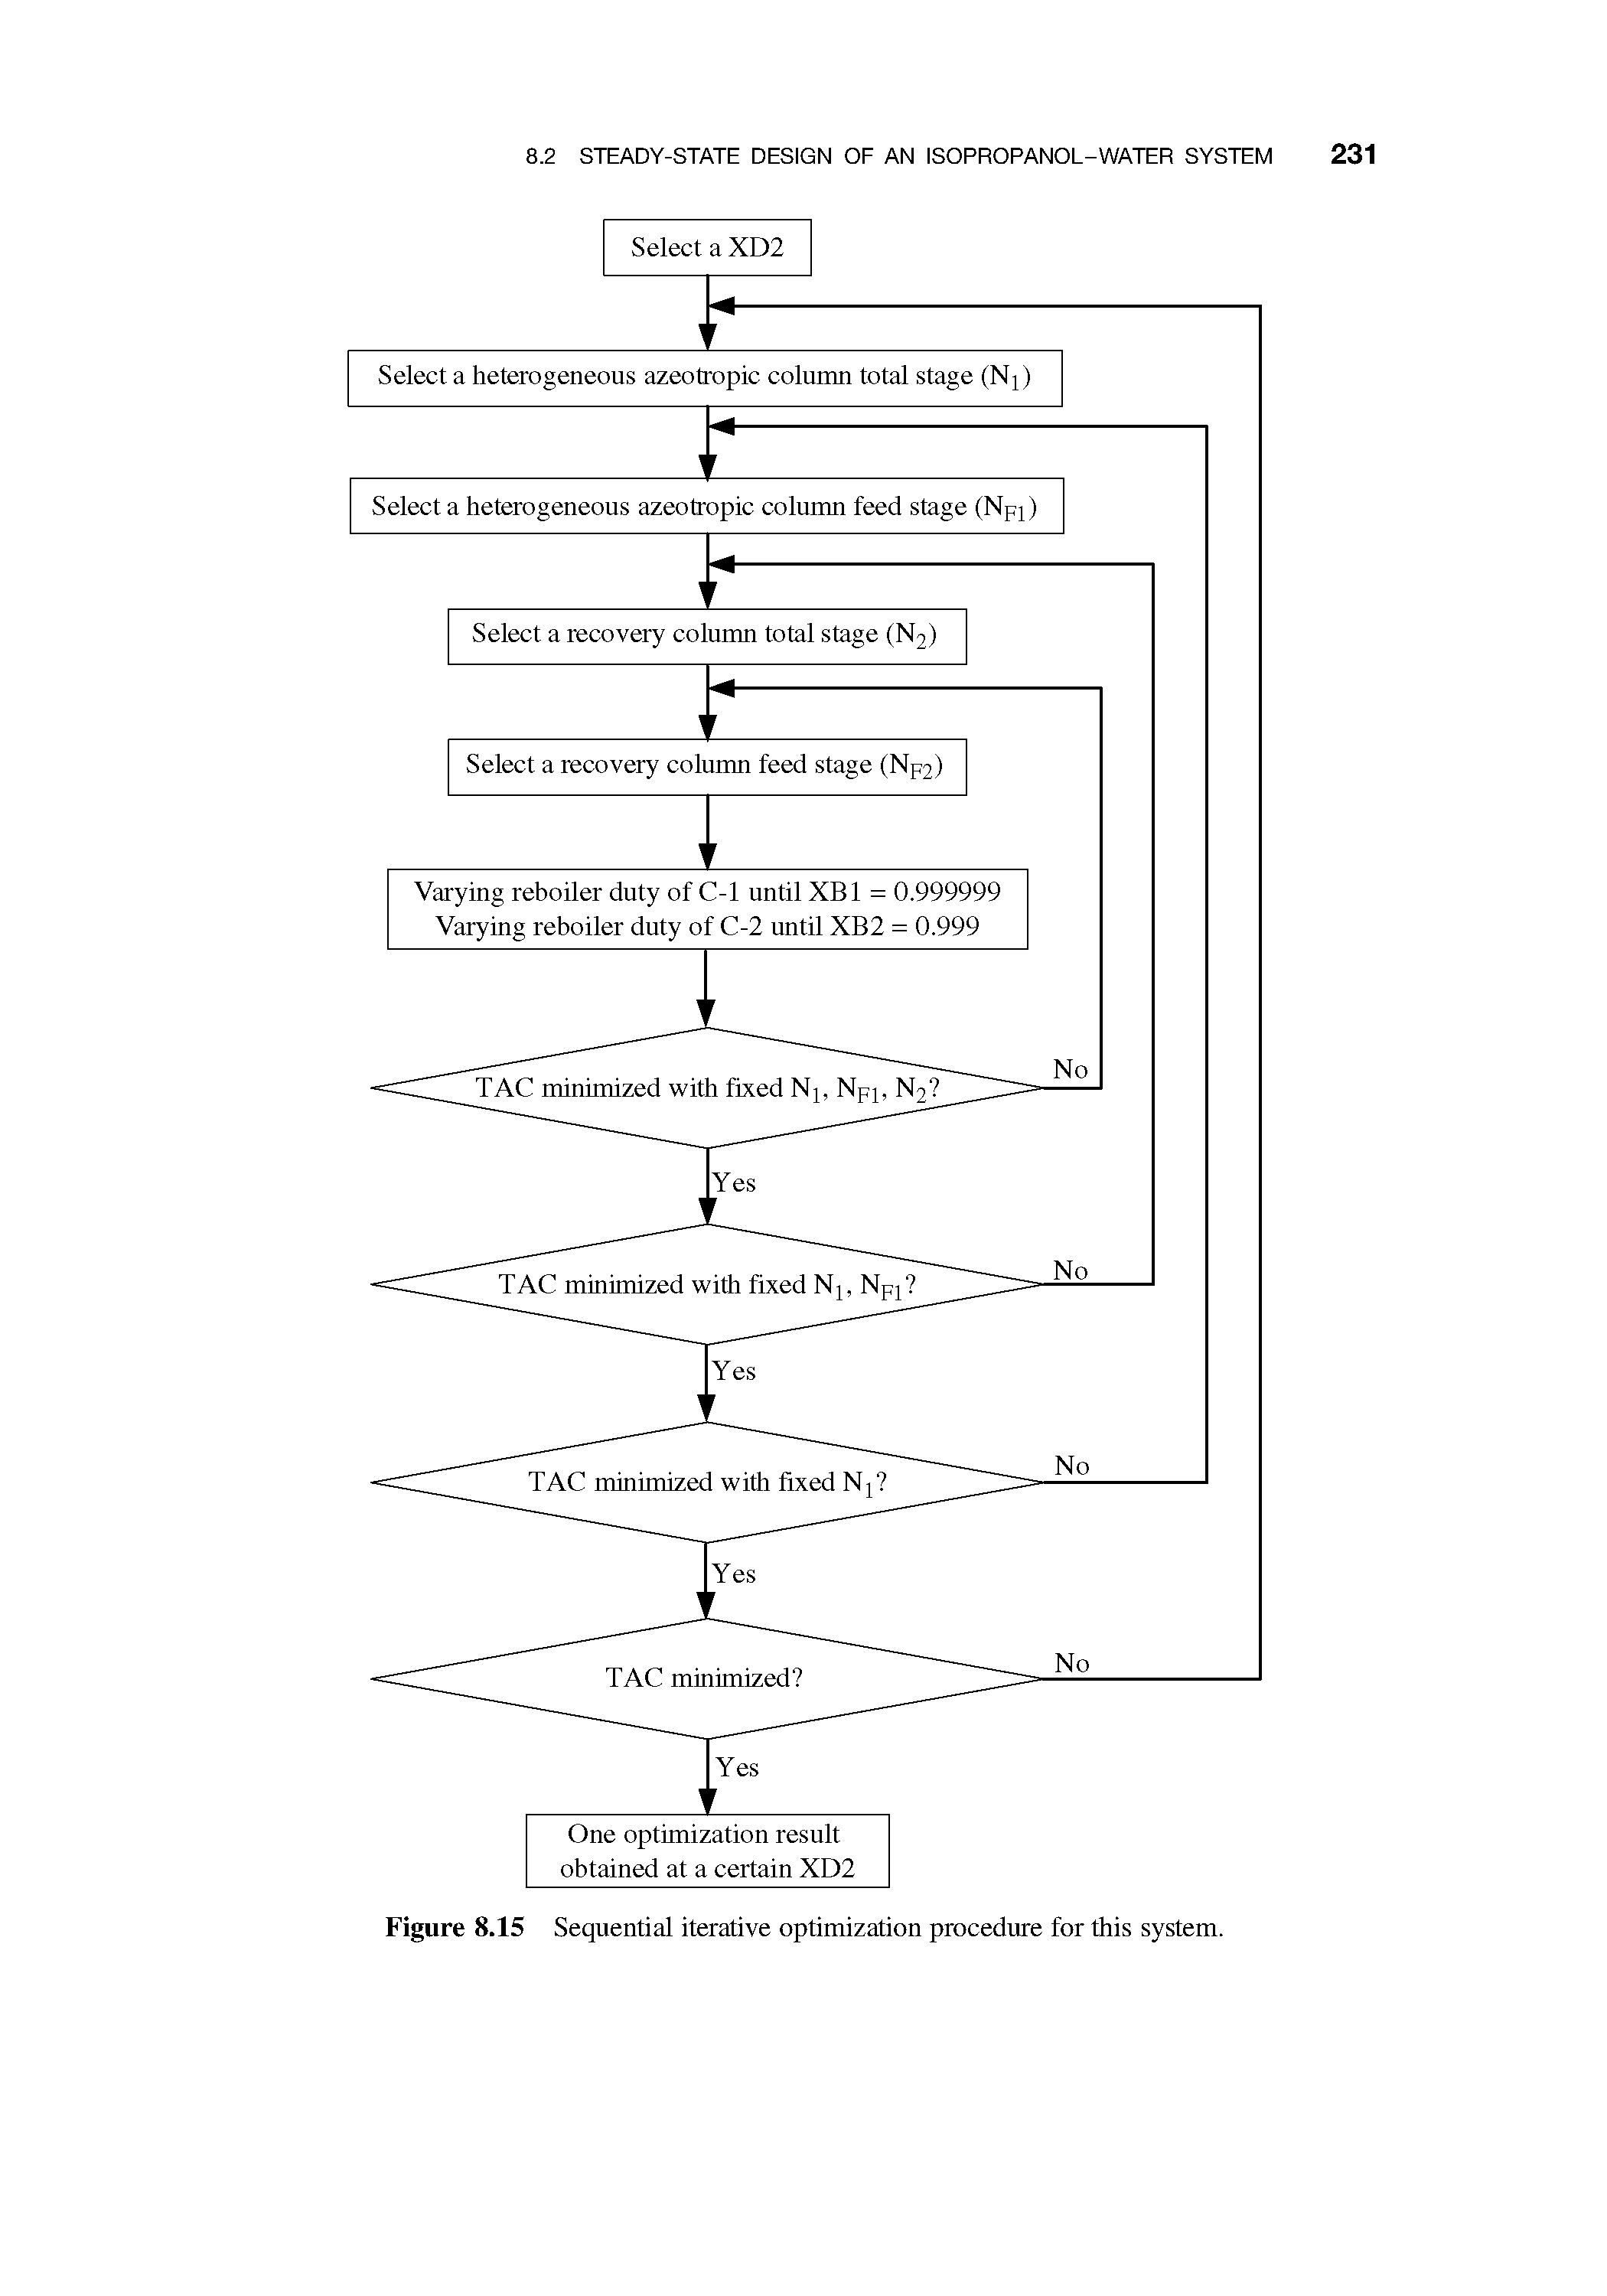 Figure 8.15 Sequential iterative optimization procedure for this system.